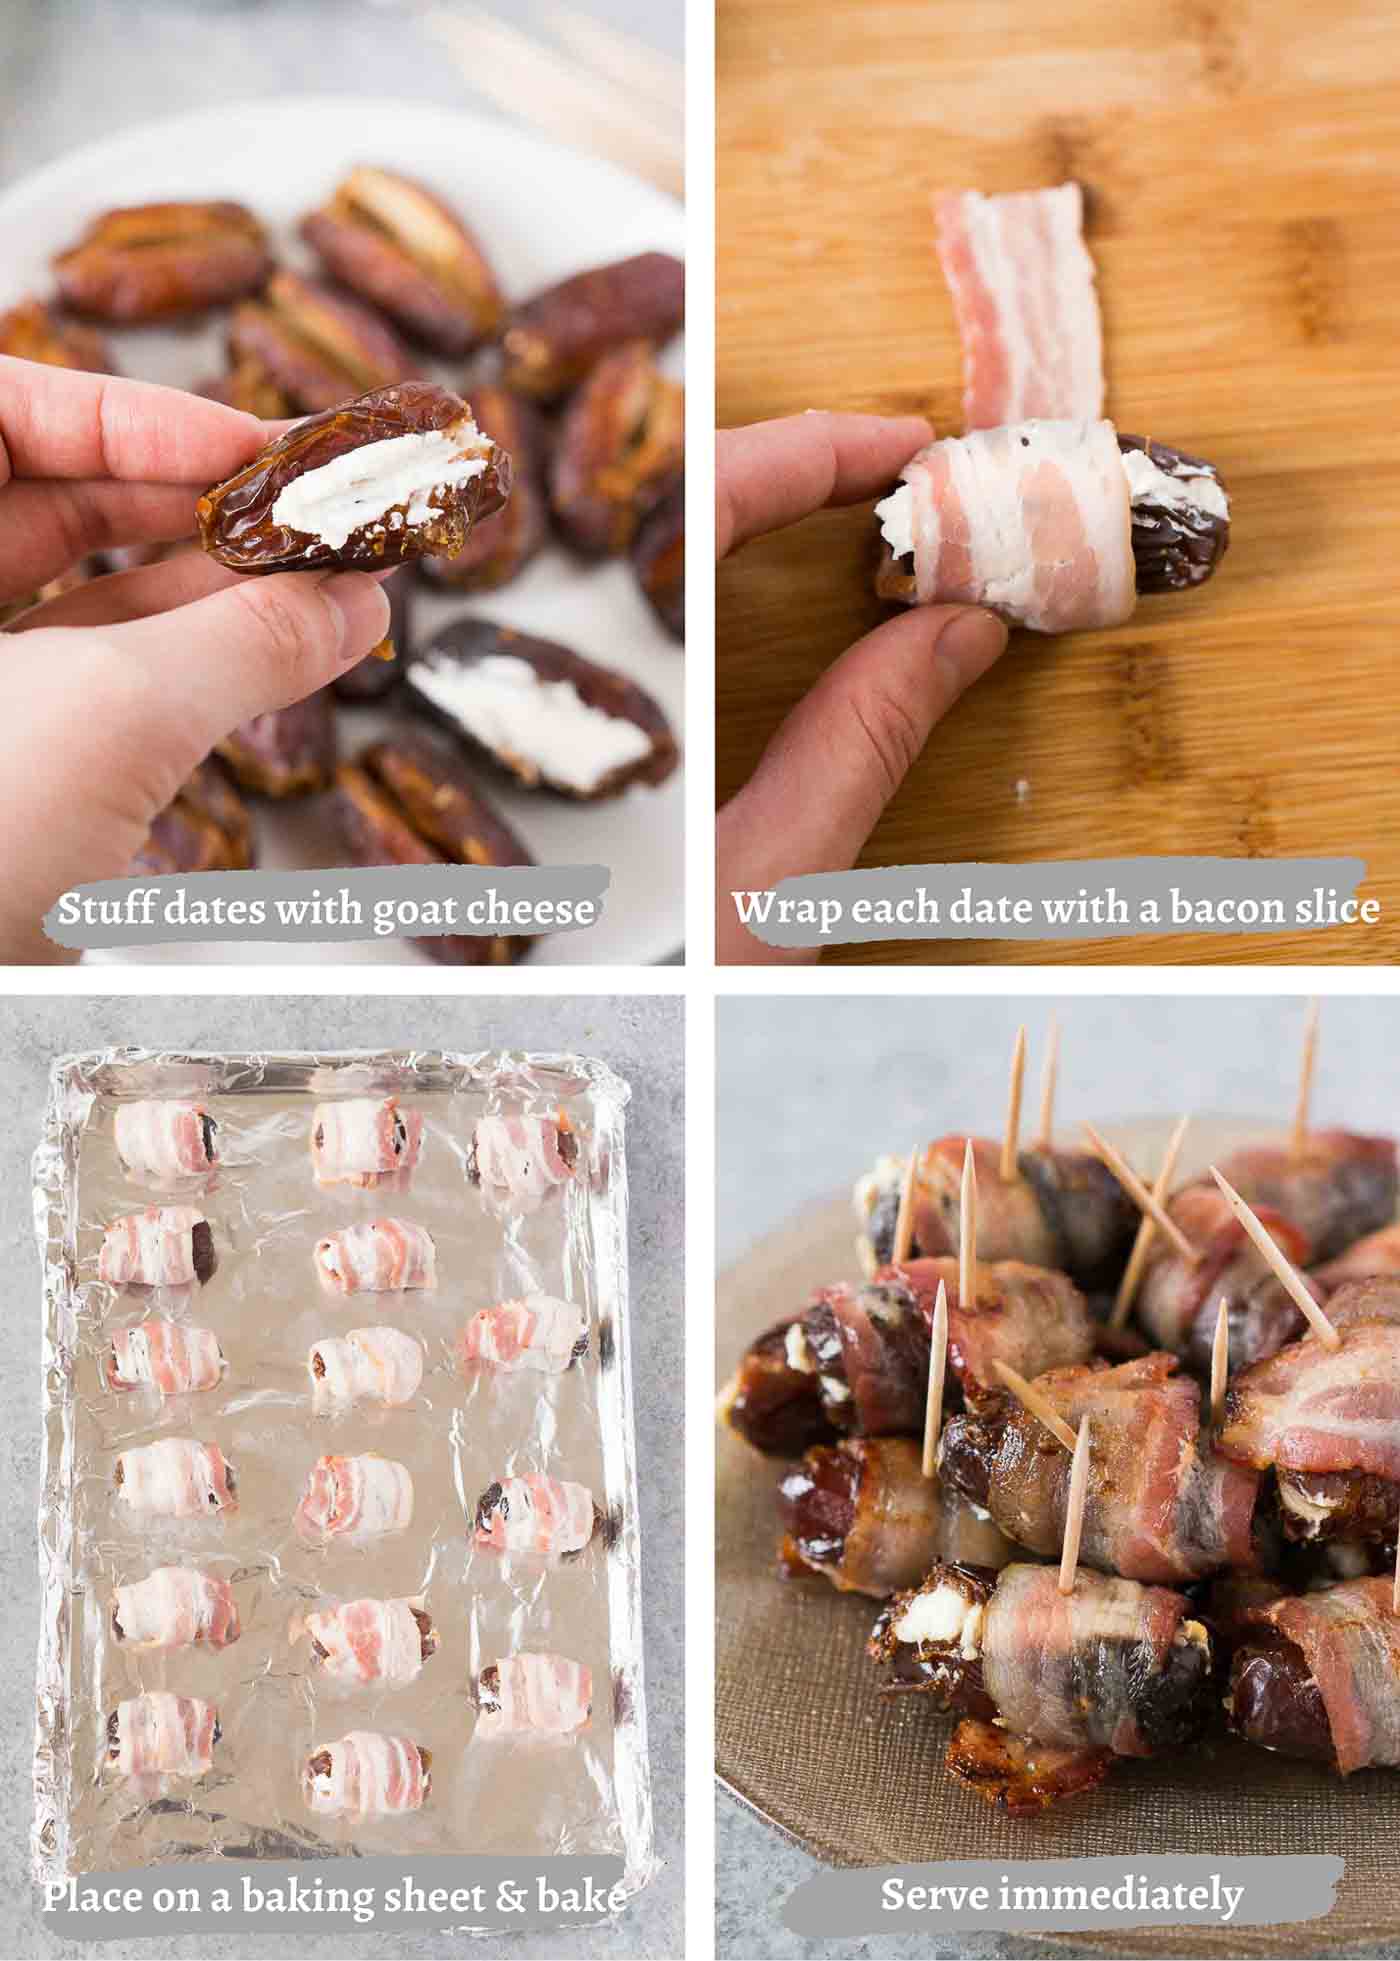 process images of making stuffed dates with goat cheese